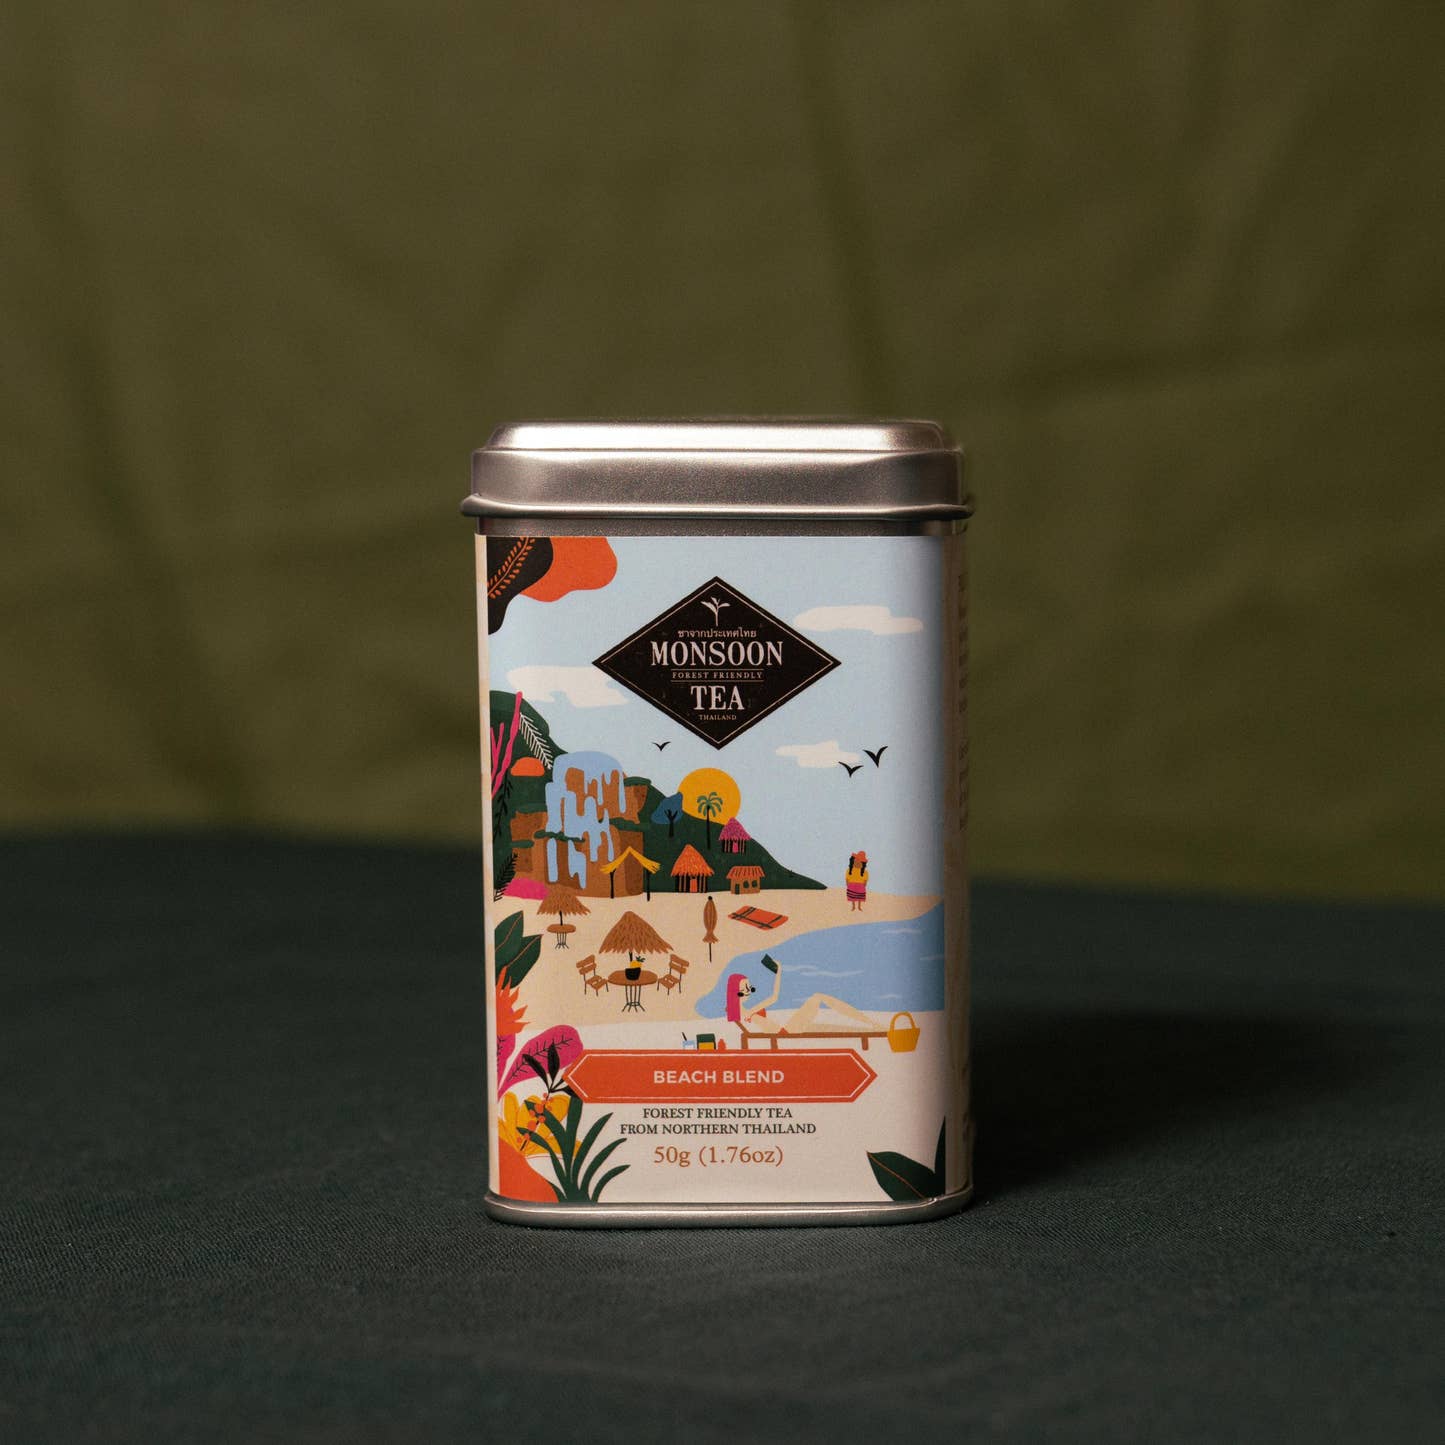 Beach Blend by Monsoon Tea loose leaf tea tin with picture of beach scene in Thailand